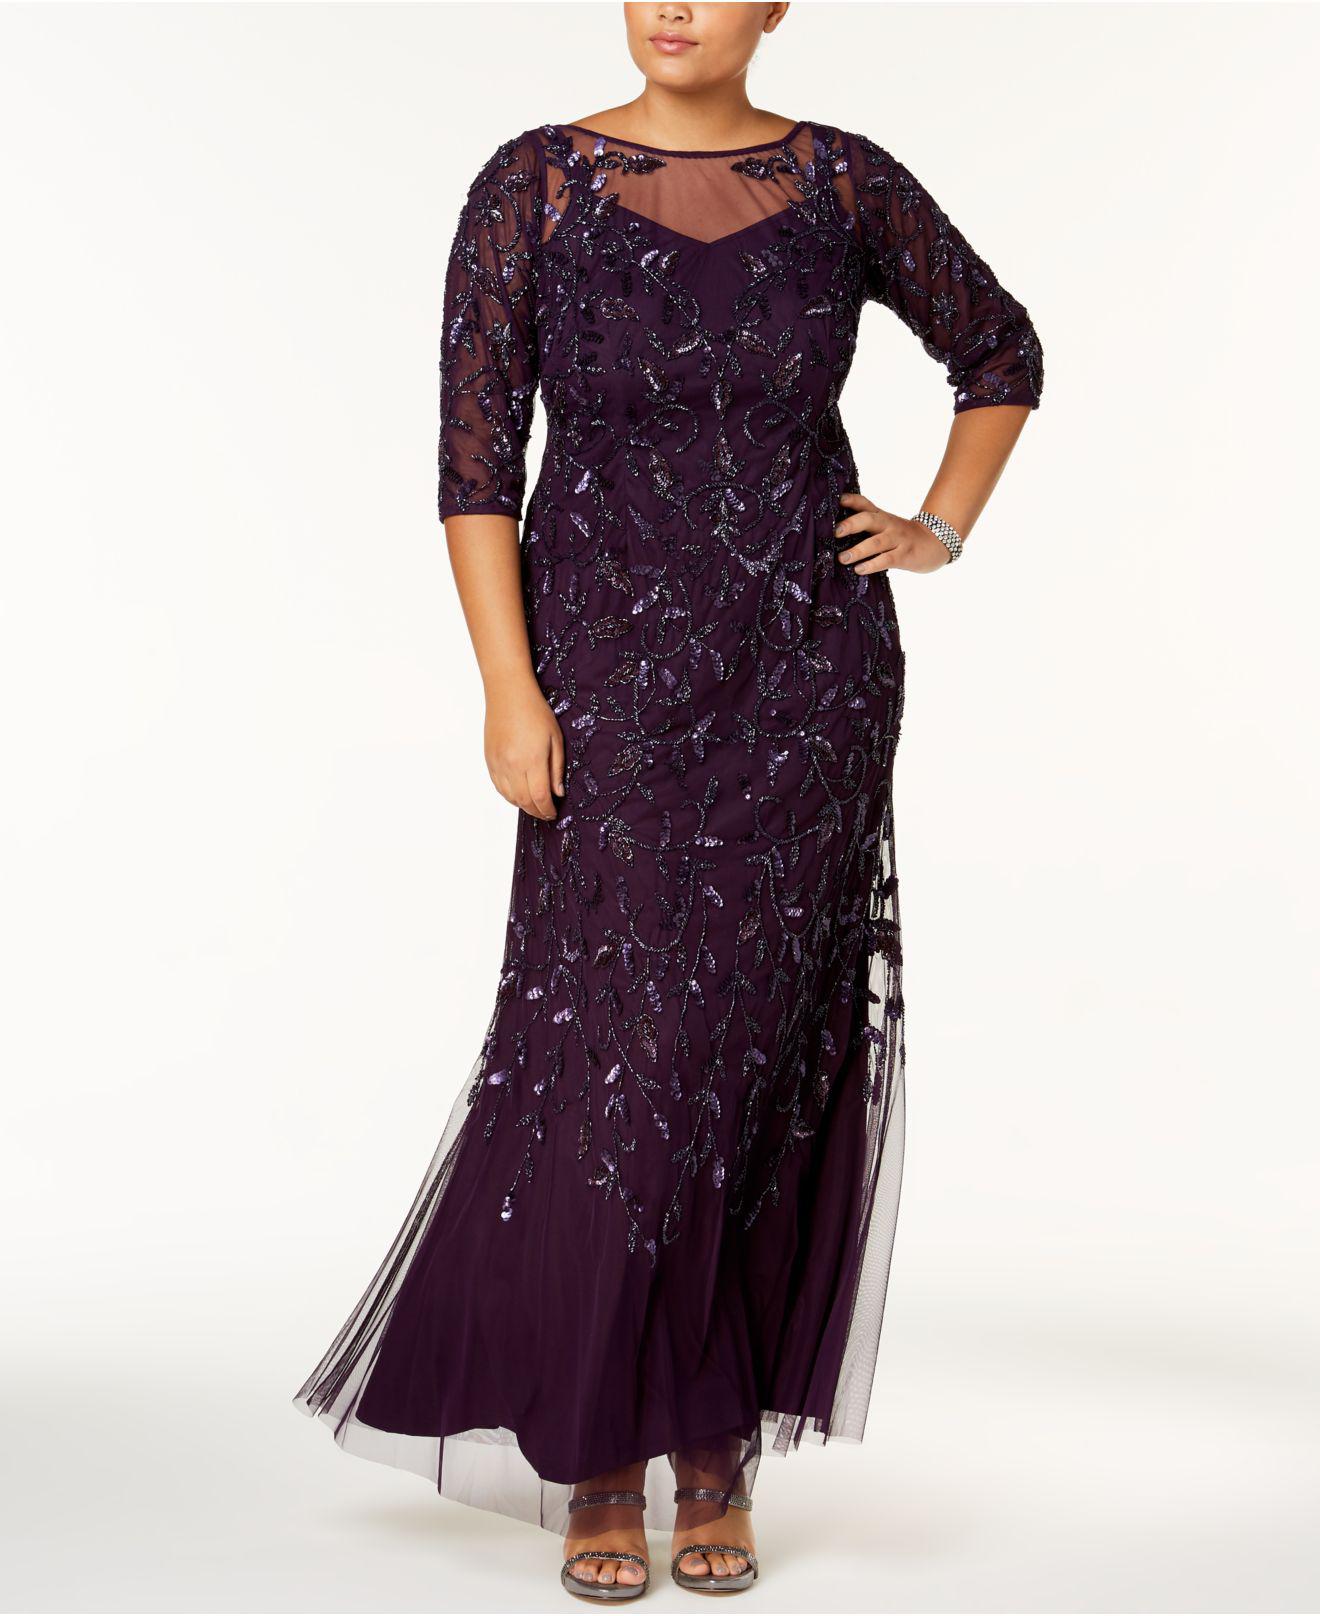 Adrianna Papell Synthetic Plus Size Beaded Mesh Gown in Amethyst (Purple) -  Lyst